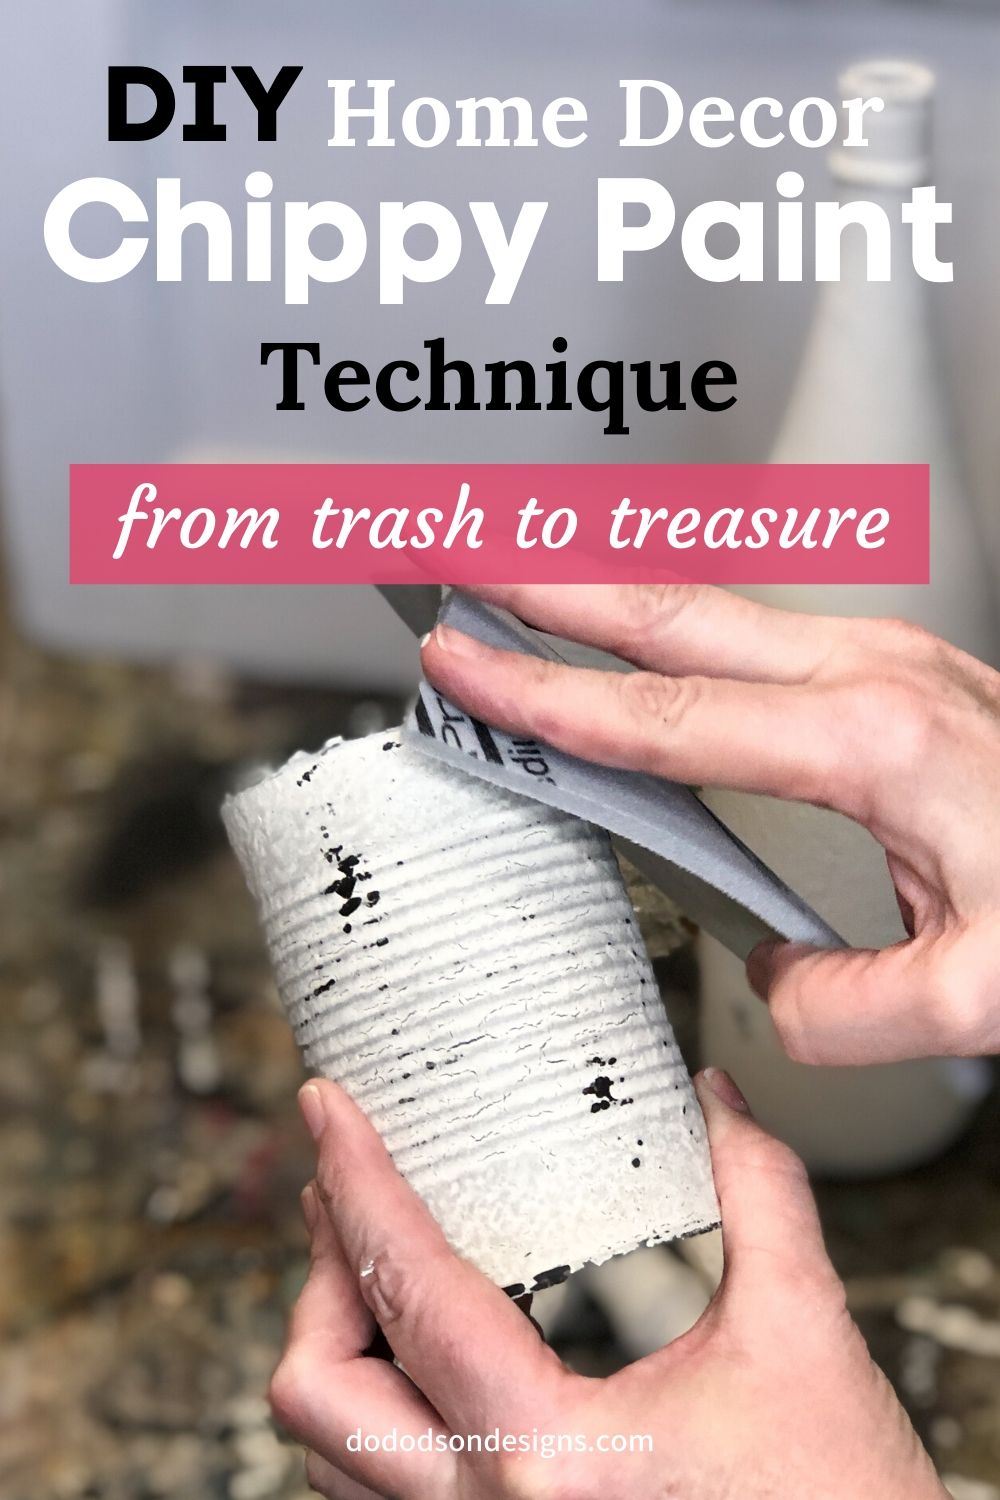 Chippy Paint Technique | From Trash To Treasure